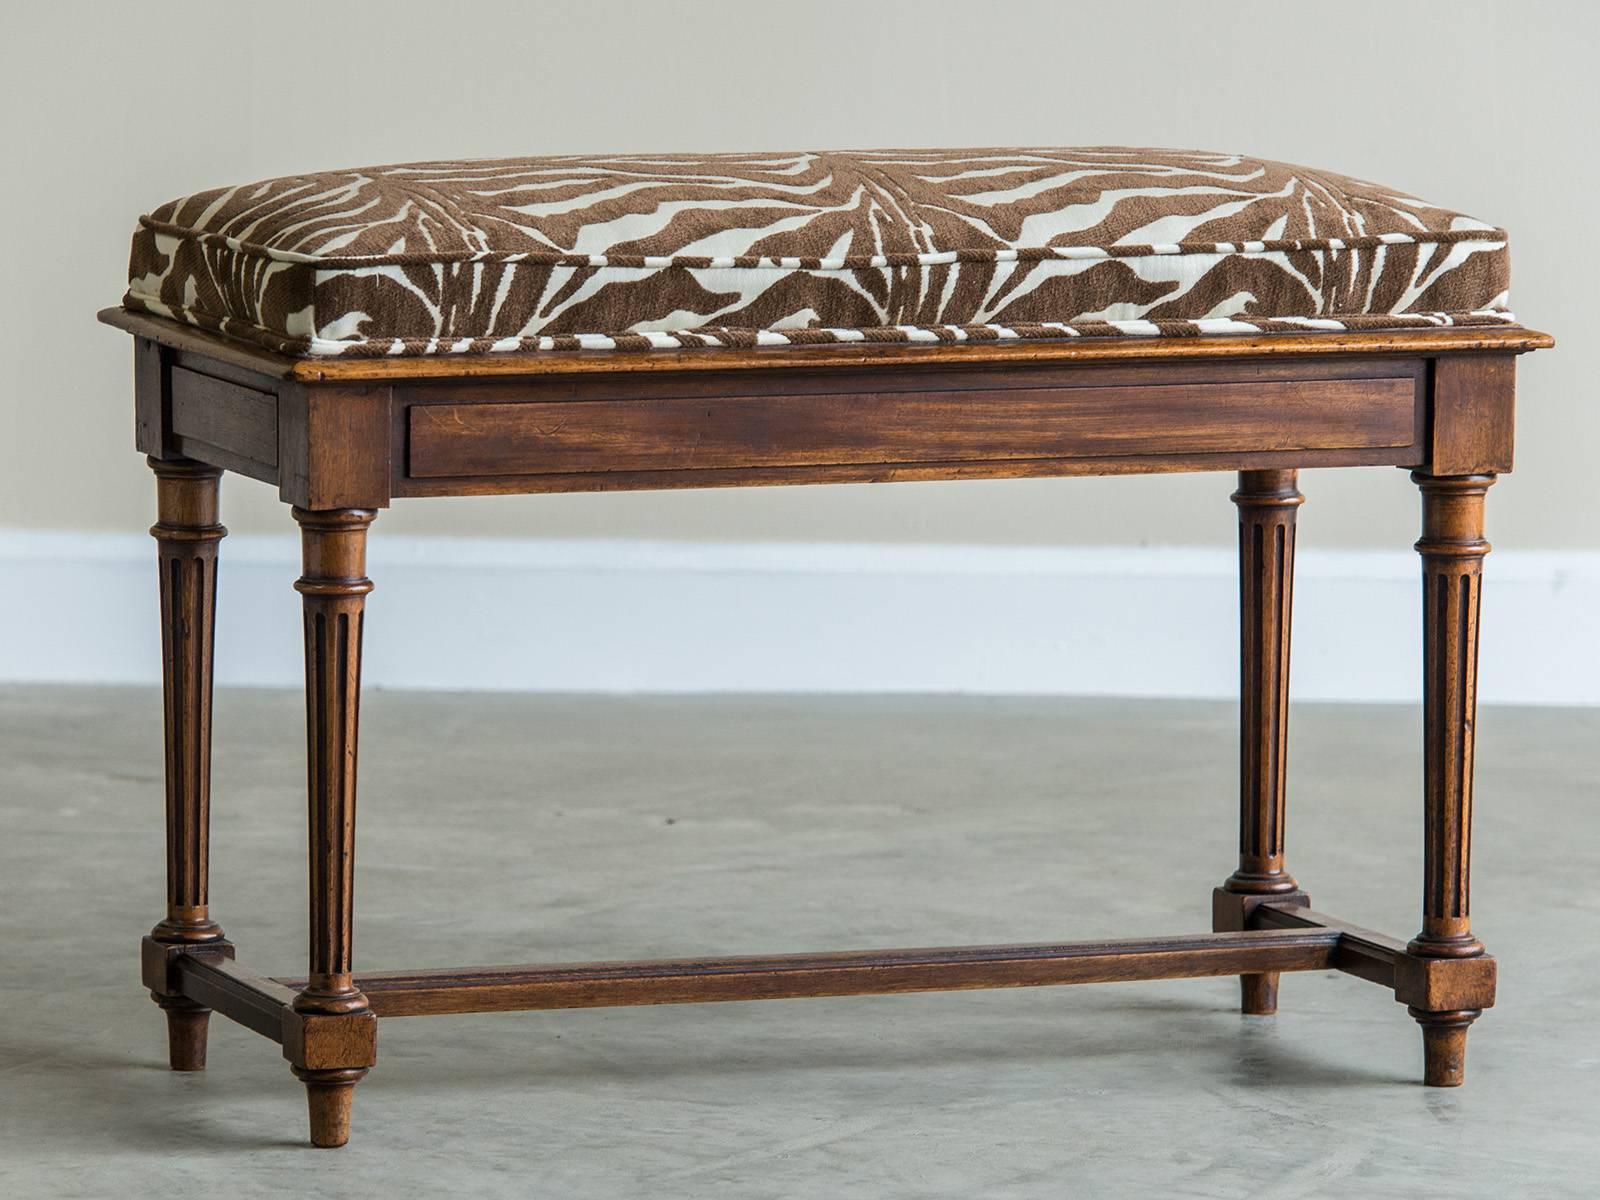 Receive our new selections direct from 1stdibs by email each week. Please click Follow Dealer below and see them first!

A Louis XVI style antique French walnut bench circa 1890. The handsome design of this seating piece exemplifies the modern